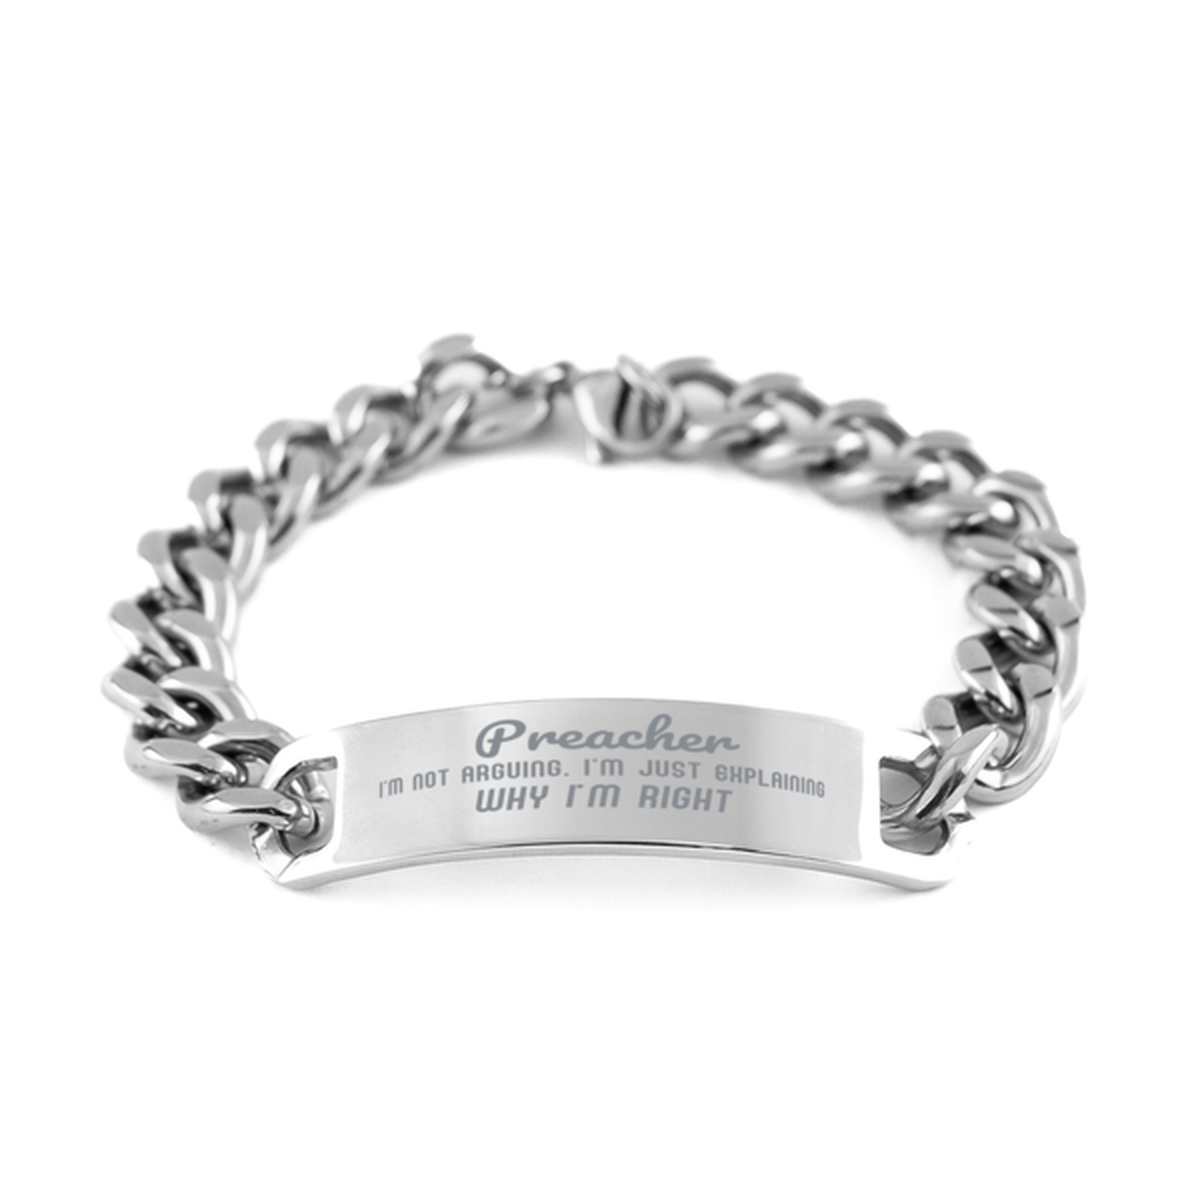 Preacher I'm not Arguing. I'm Just Explaining Why I'm RIGHT Cuban Chain Stainless Steel Bracelet, Graduation Birthday Christmas Preacher Gifts For Preacher Funny Saying Quote Present for Men Women Coworker